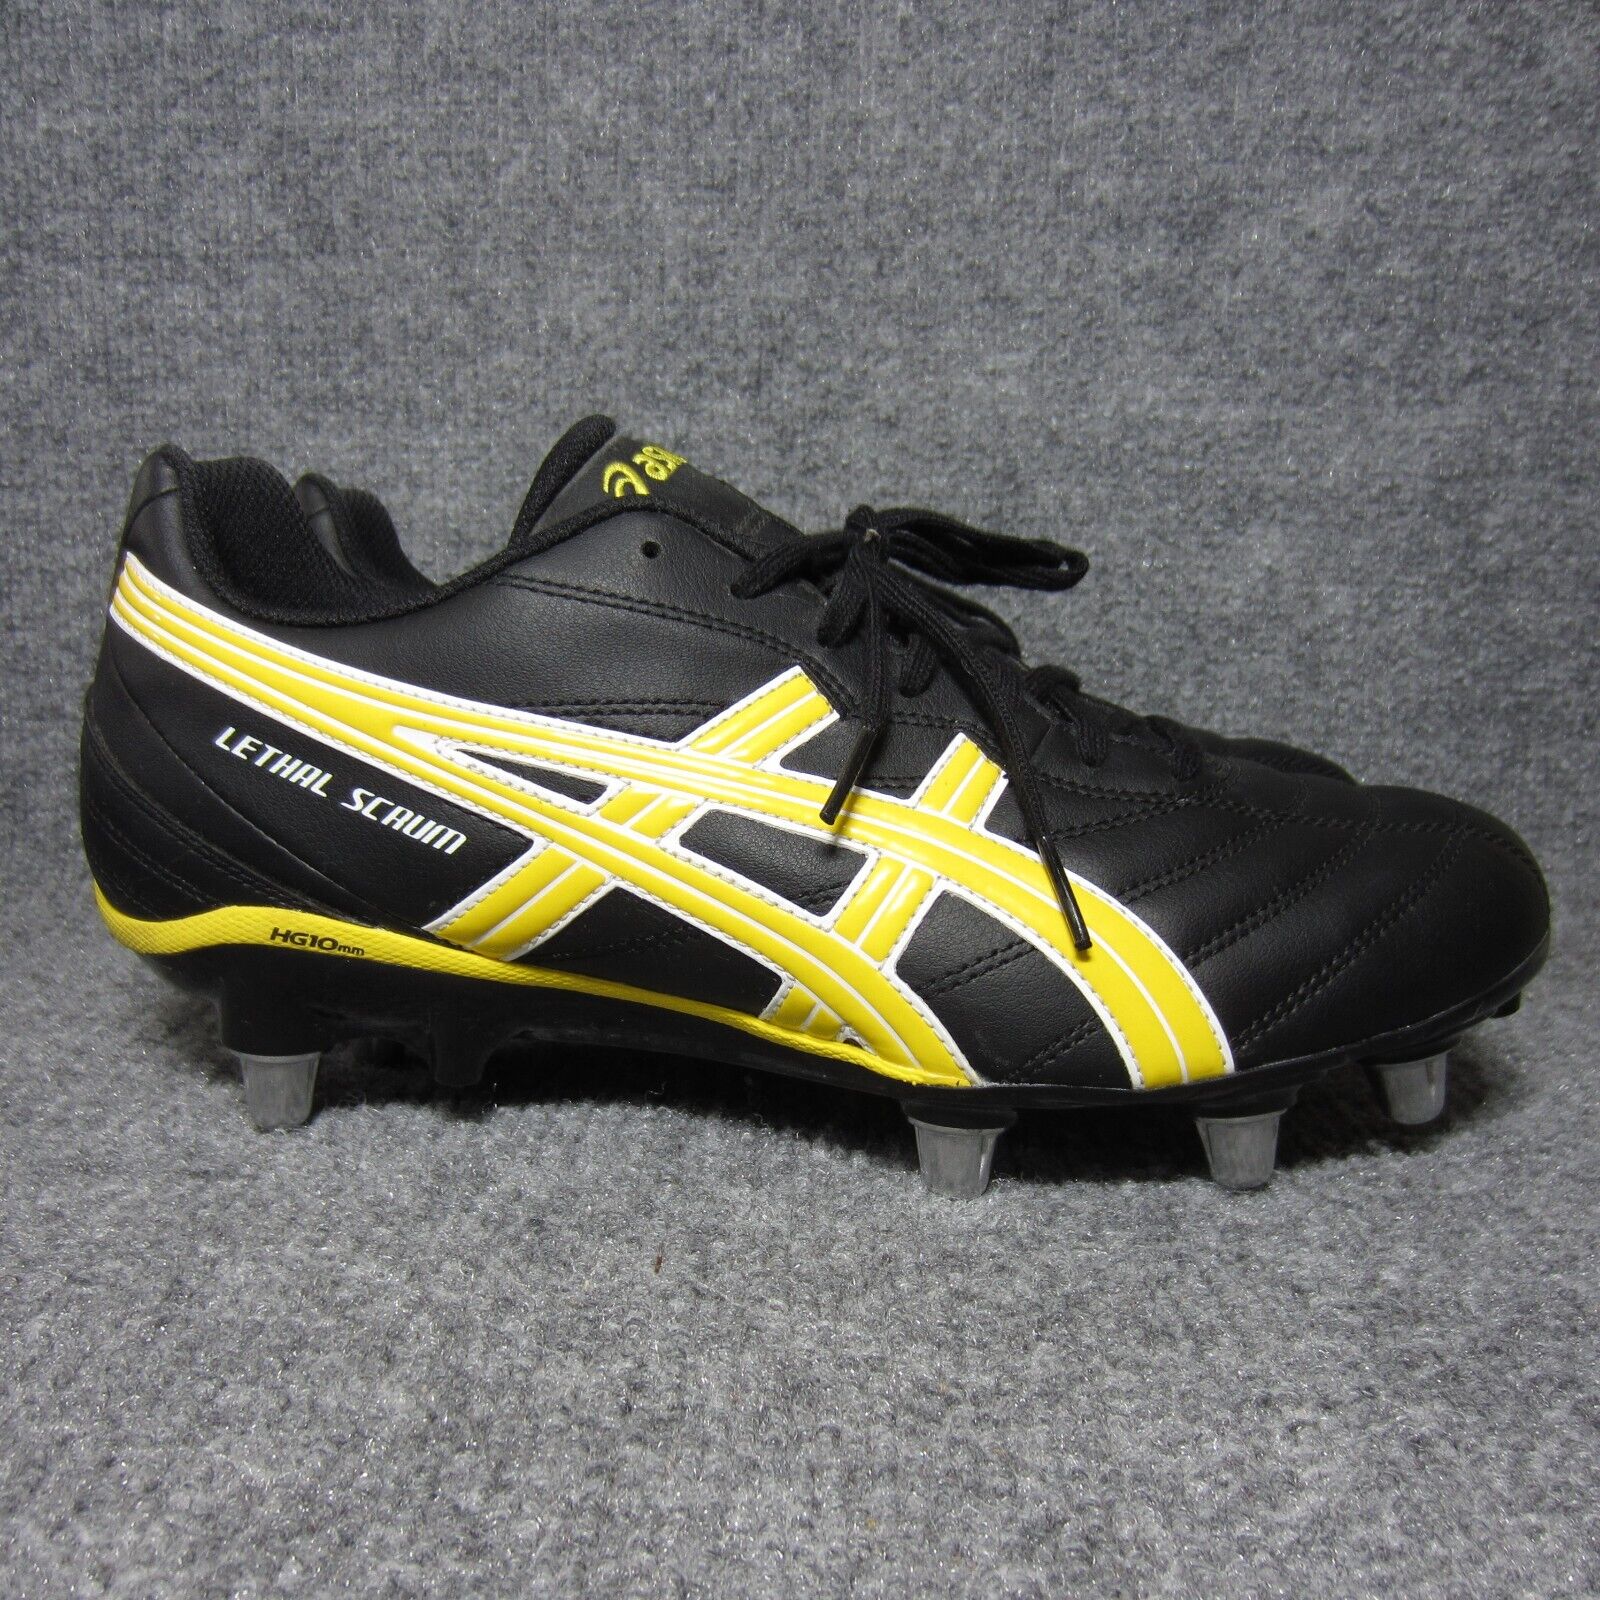 ASICS Lethal Scrum SG Soccer Cleats Rugby Football Boot Black Yellow Mens 11